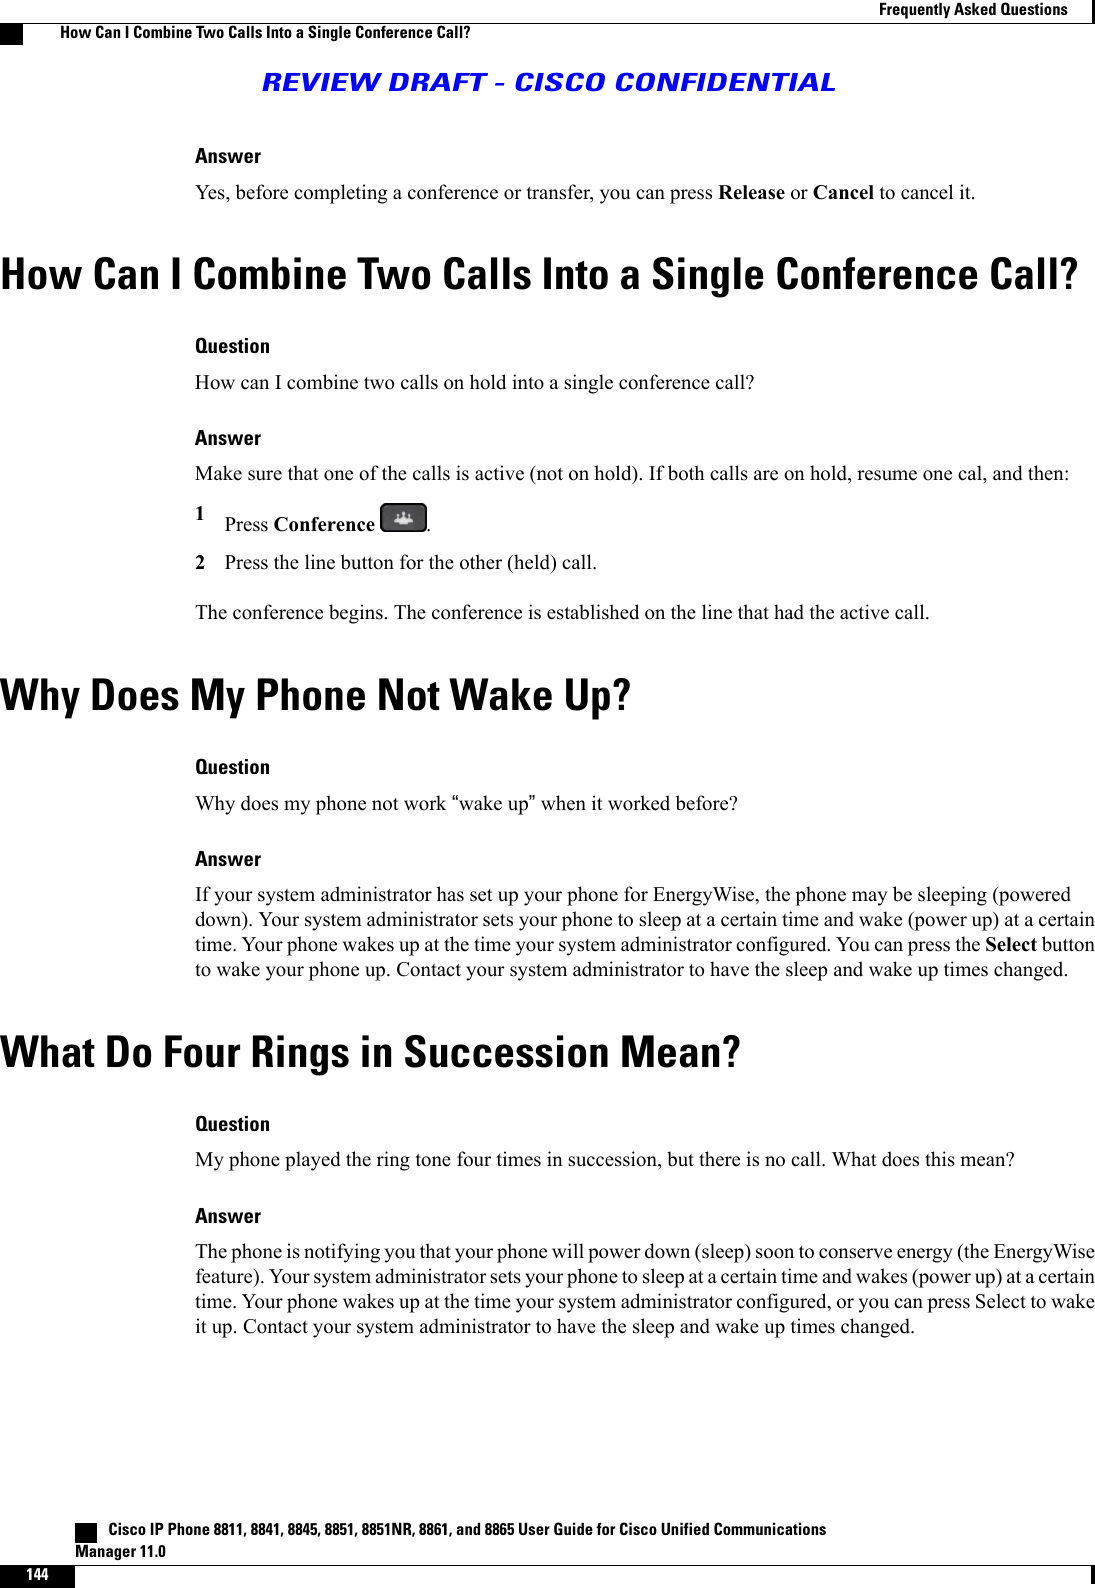 AnswerYes, before completing a conference or transfer, you can press Release or Cancel to cancel it.How Can I Combine Two Calls Into a Single Conference Call?QuestionHow can I combine two calls on hold into a single conference call?AnswerMake sure that one of the calls is active (not on hold). If both calls are on hold, resume one cal, and then:1Press Conference .2Press the line button for the other (held) call.The conference begins. The conference is established on the line that had the active call.Why Does My Phone Not Wake Up?QuestionWhy does my phone not work “wake up”when it worked before?AnswerIf your system administrator has set up your phone for EnergyWise, the phone may be sleeping (powereddown). Your system administrator sets your phone to sleep at a certain time and wake (power up) at a certaintime. Your phone wakes up at the time your system administrator configured. You can press the Select buttonto wake your phone up. Contact your system administrator to have the sleep and wake up times changed.What Do Four Rings in Succession Mean?QuestionMy phone played the ring tone four times in succession, but there is no call. What does this mean?AnswerThe phone is notifying you that your phone will power down (sleep) soon to conserve energy (the EnergyWisefeature). Your system administrator sets your phone to sleep at a certain time and wakes (power up) at a certaintime. Your phone wakes up at the time your system administrator configured, or you can press Select to wakeit up. Contact your system administrator to have the sleep and wake up times changed.   Cisco IP Phone 8811, 8841, 8845, 8851, 8851NR, 8861, and 8865 User Guide for Cisco Unified CommunicationsManager 11.0144Frequently Asked QuestionsHow Can I Combine Two Calls Into a Single Conference Call?REVIEW DRAFT - CISCO CONFIDENTIAL